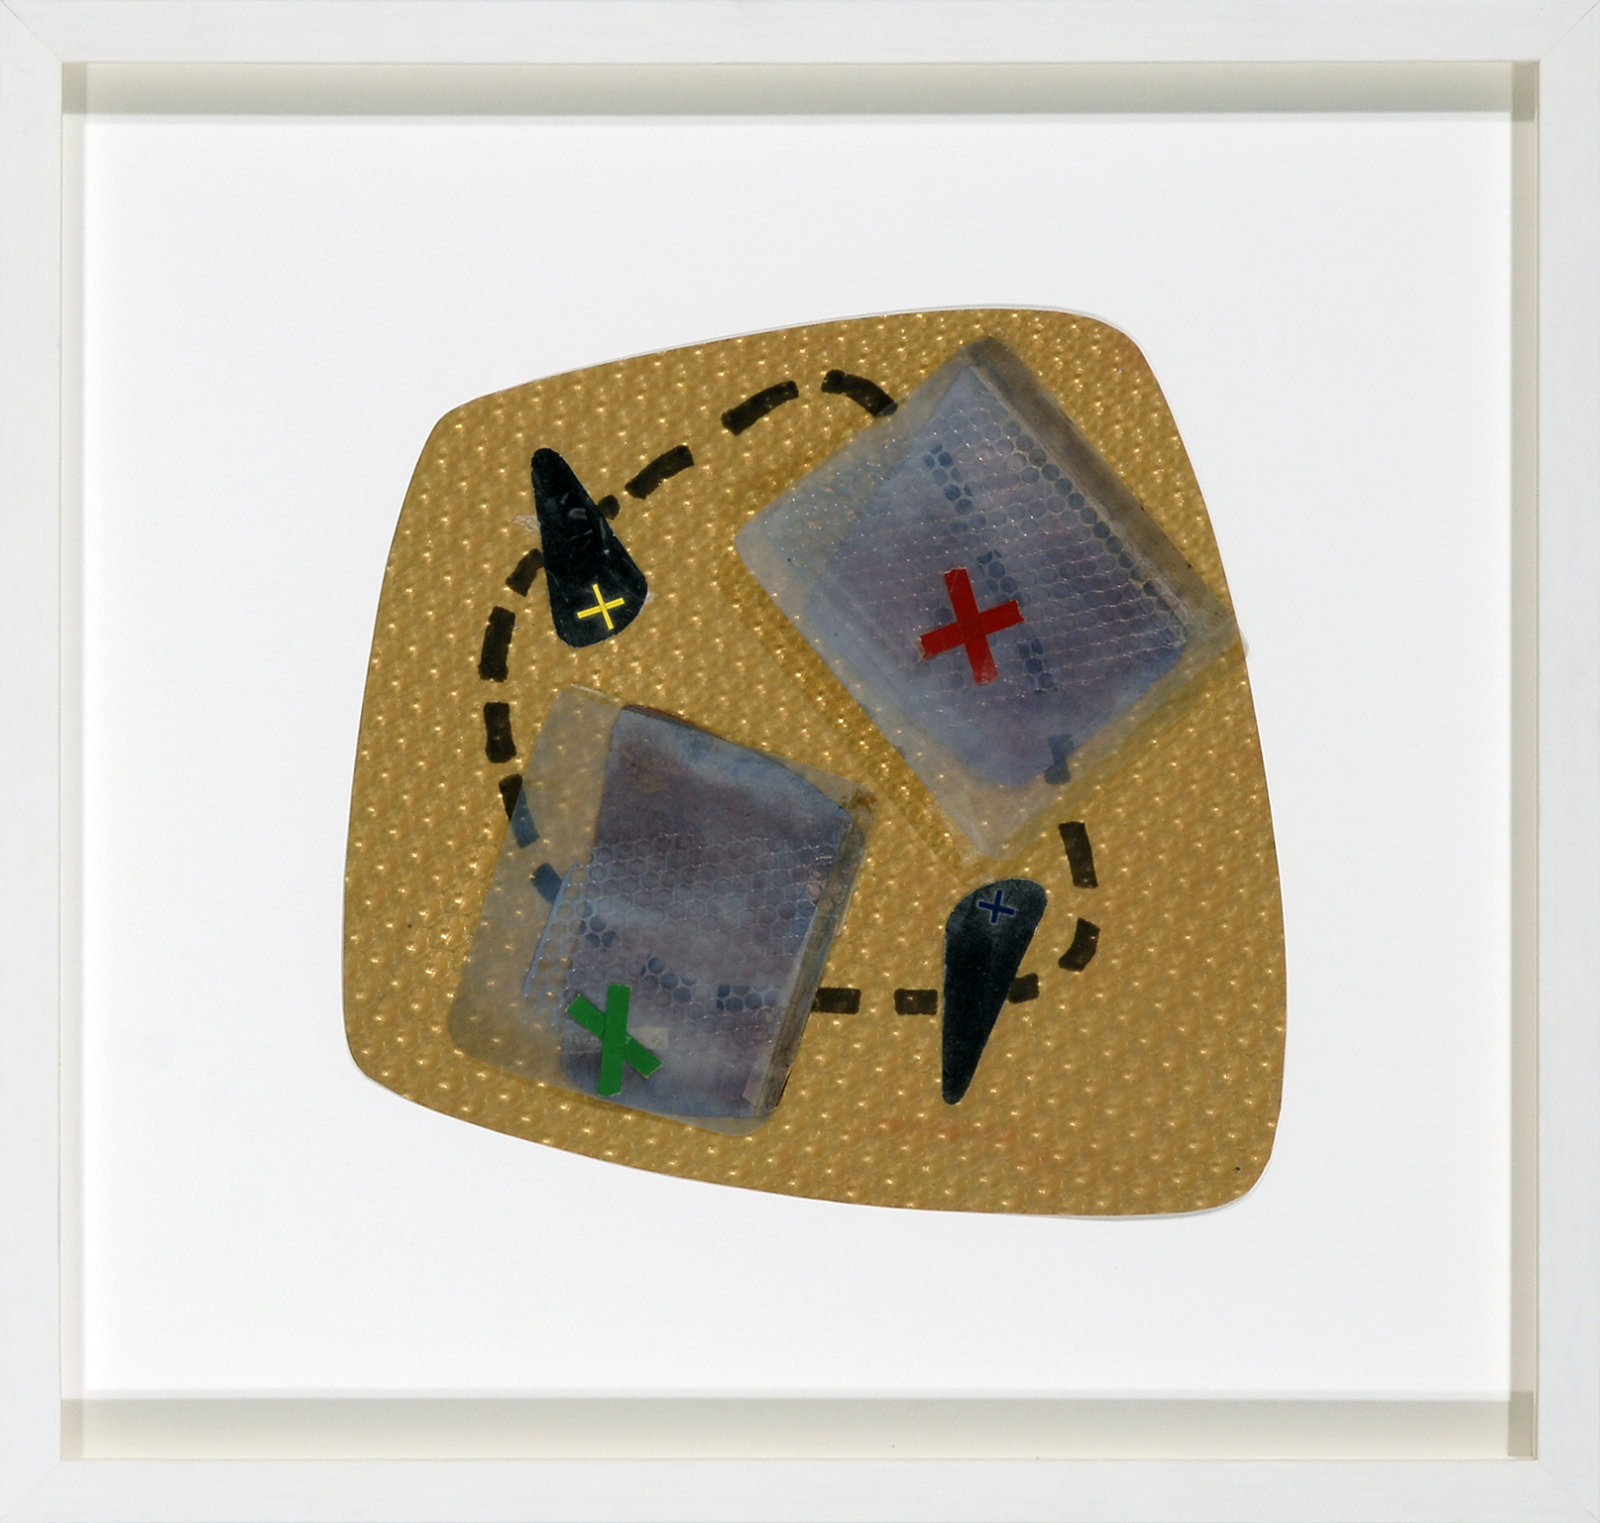 Jerry Pethick, Beginning Rolux, 1966, rubber, tile, tape, rolux, 19 x 18 in. (47 x 45 cm)